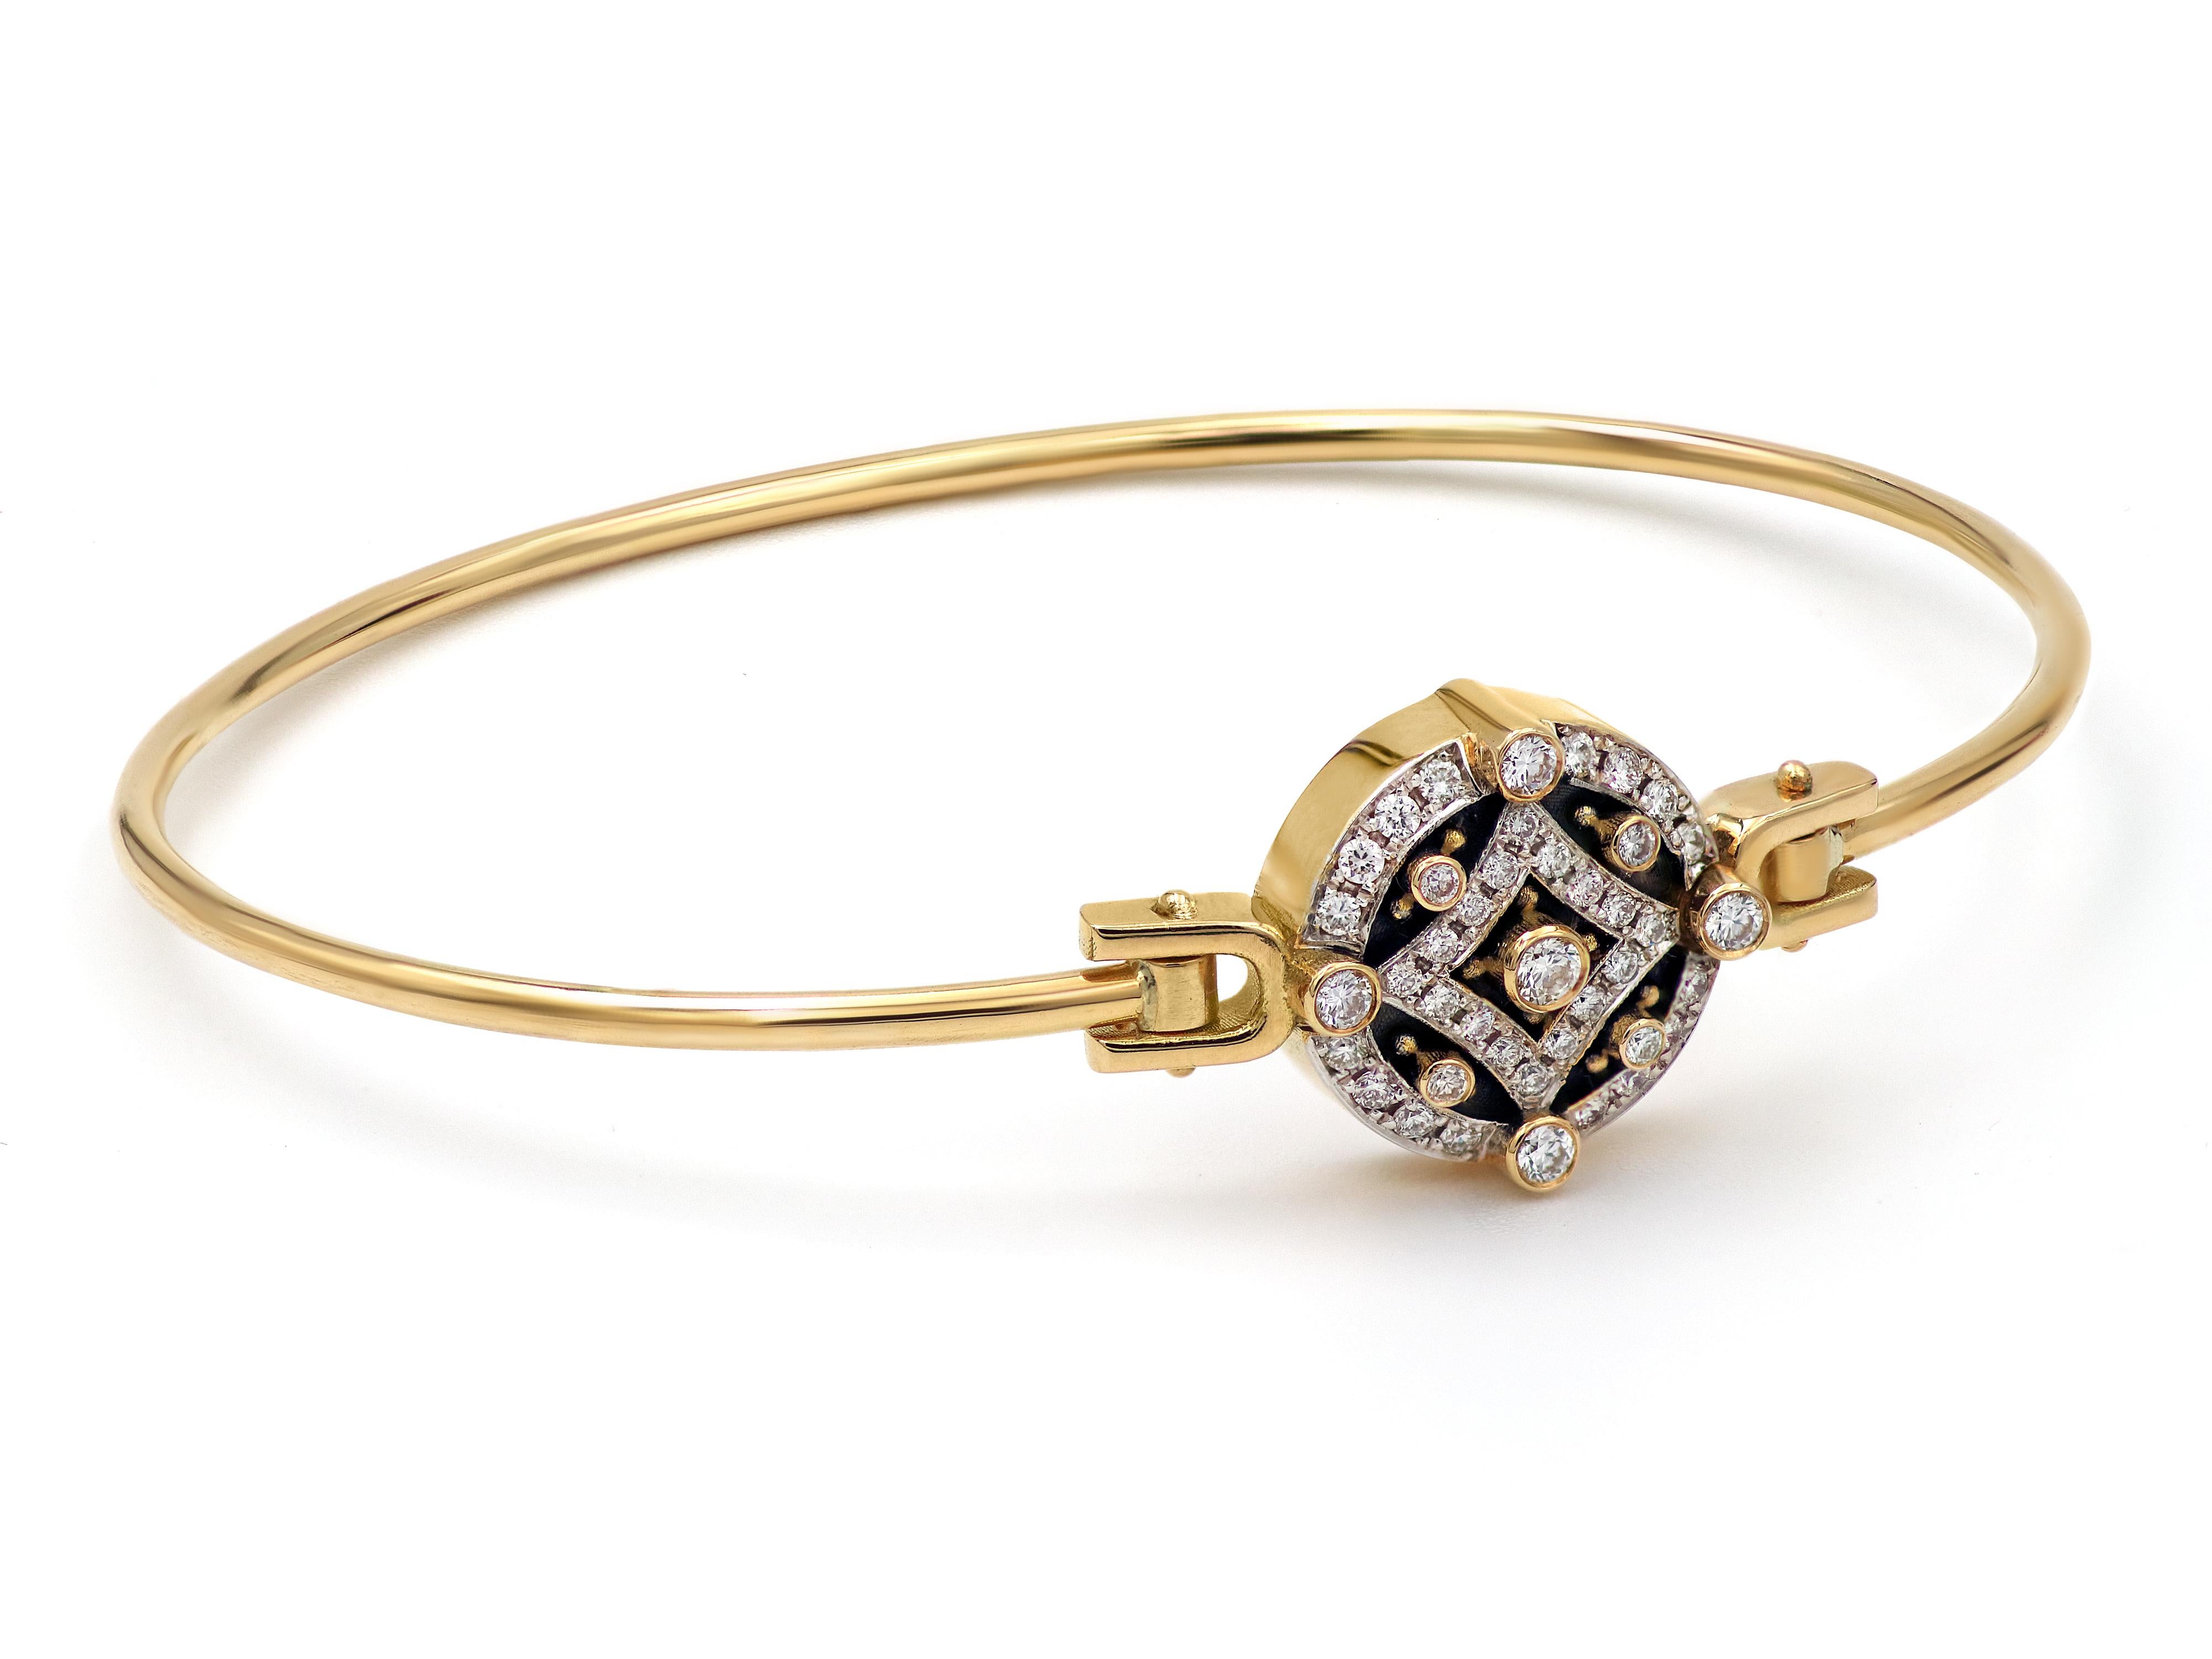 The sweetest bangle of the Noir Collection. The perfect mixer in a party bracelet and made to sustain any daily wear with its solid wire and the secret clap that is hold under the diamond. 18k gold and 0.44 carats brilliant diamonds in our signature